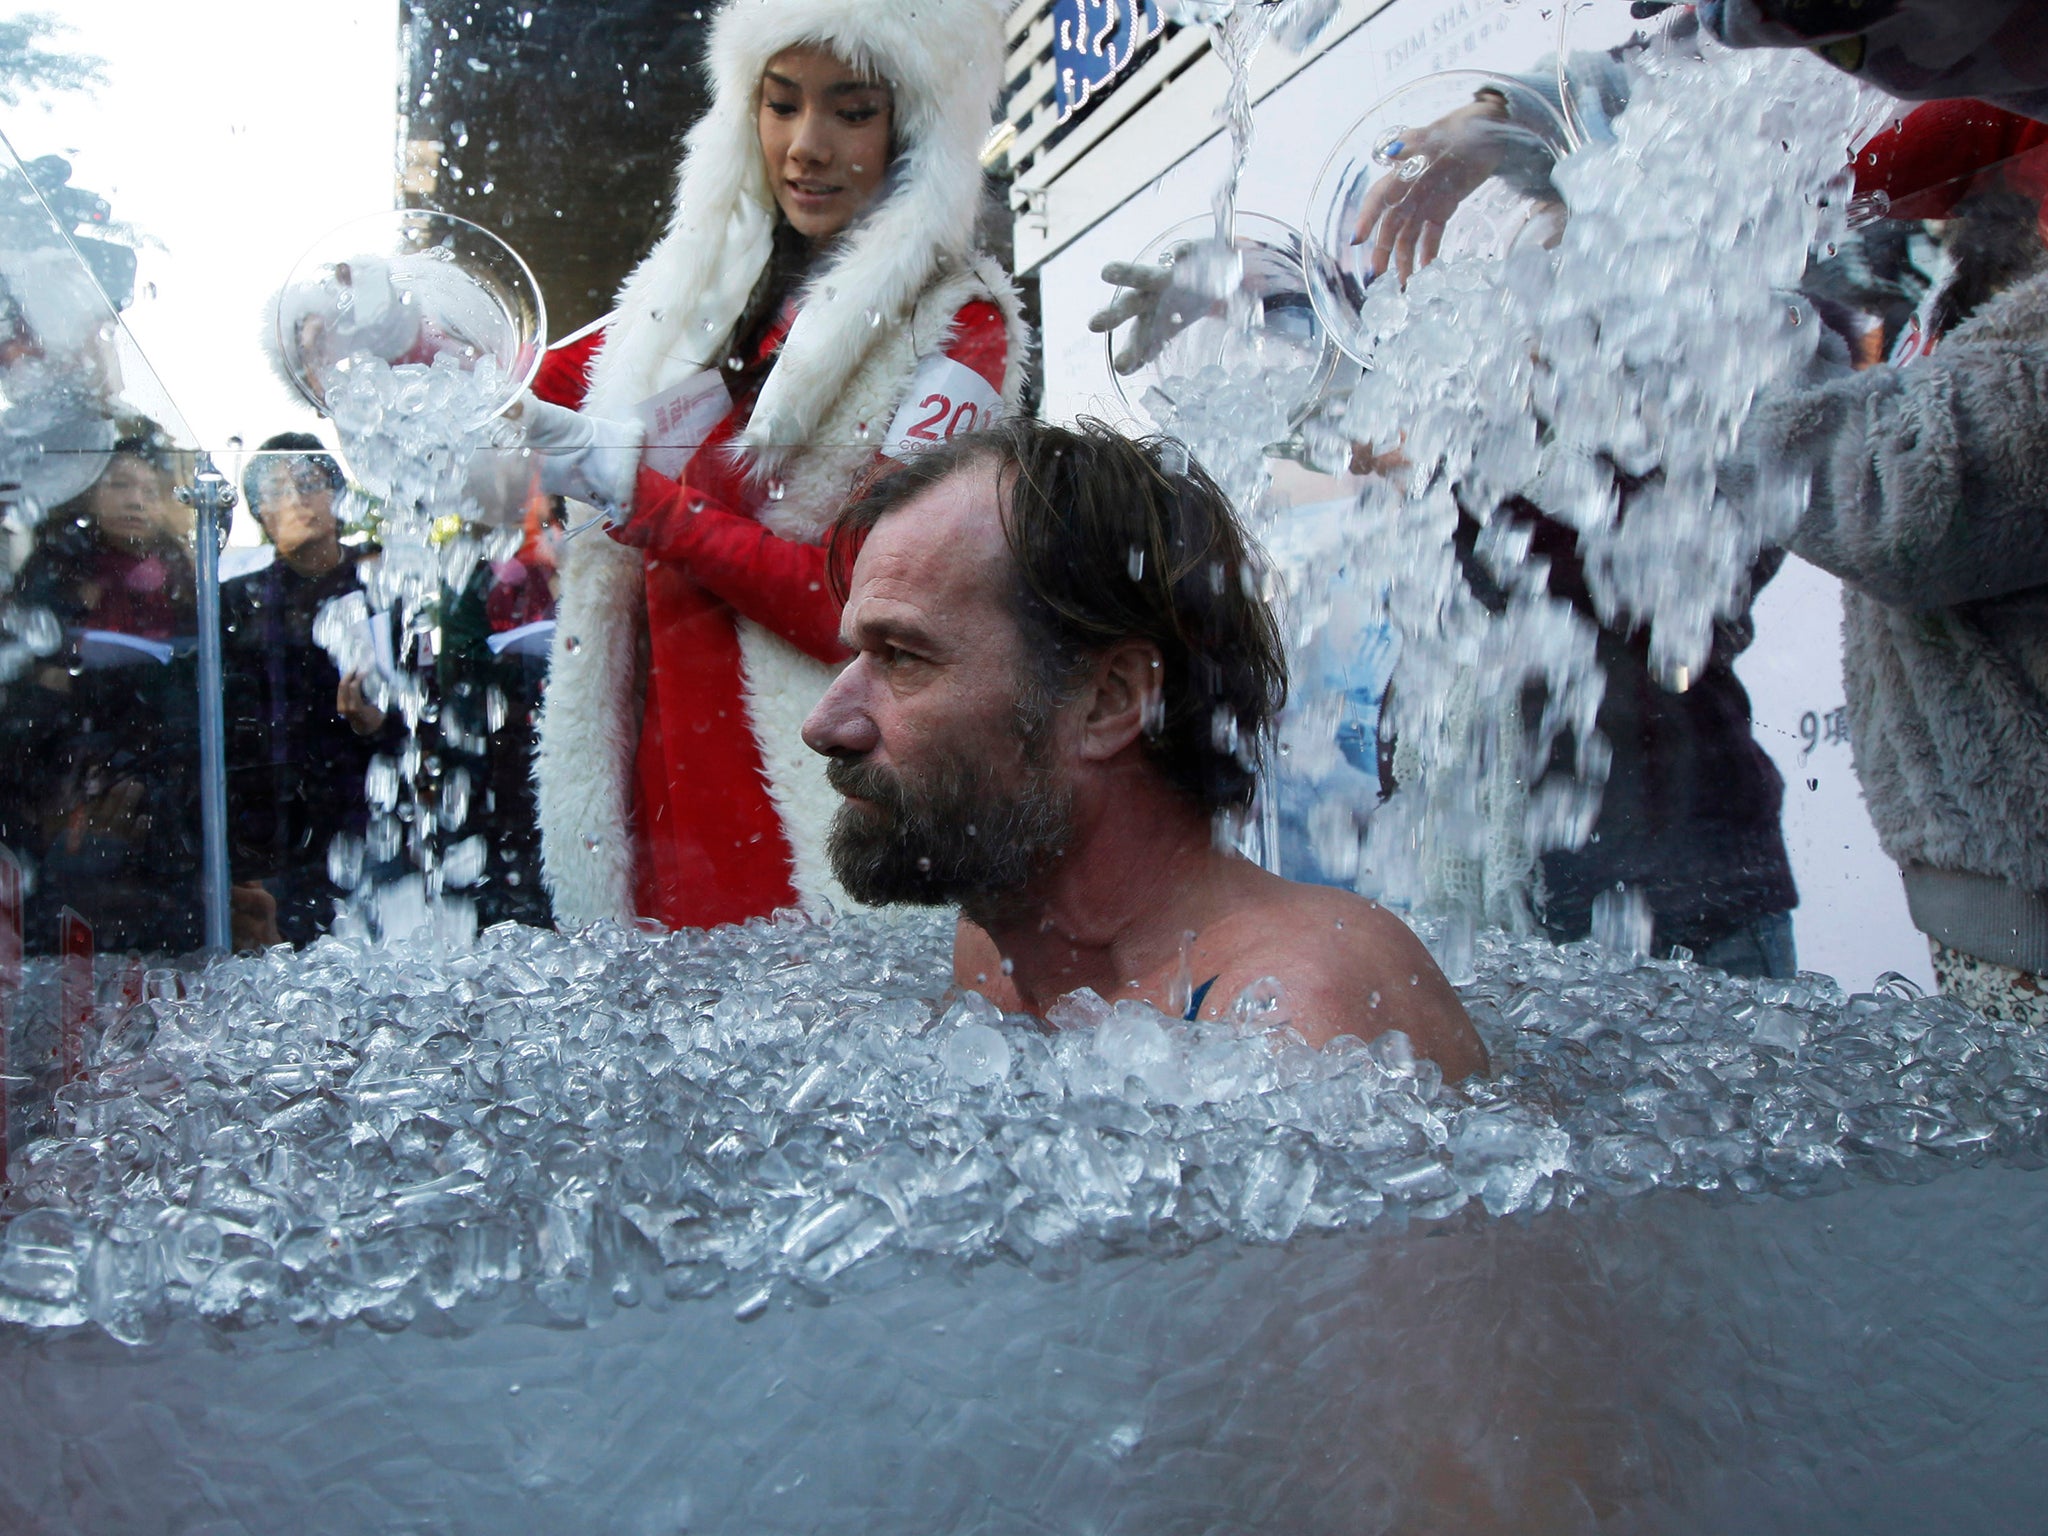 Wim Hof of the Netherlands, known as the Iceman, the Guinness World Record holder for his ability to withstand extreme cold